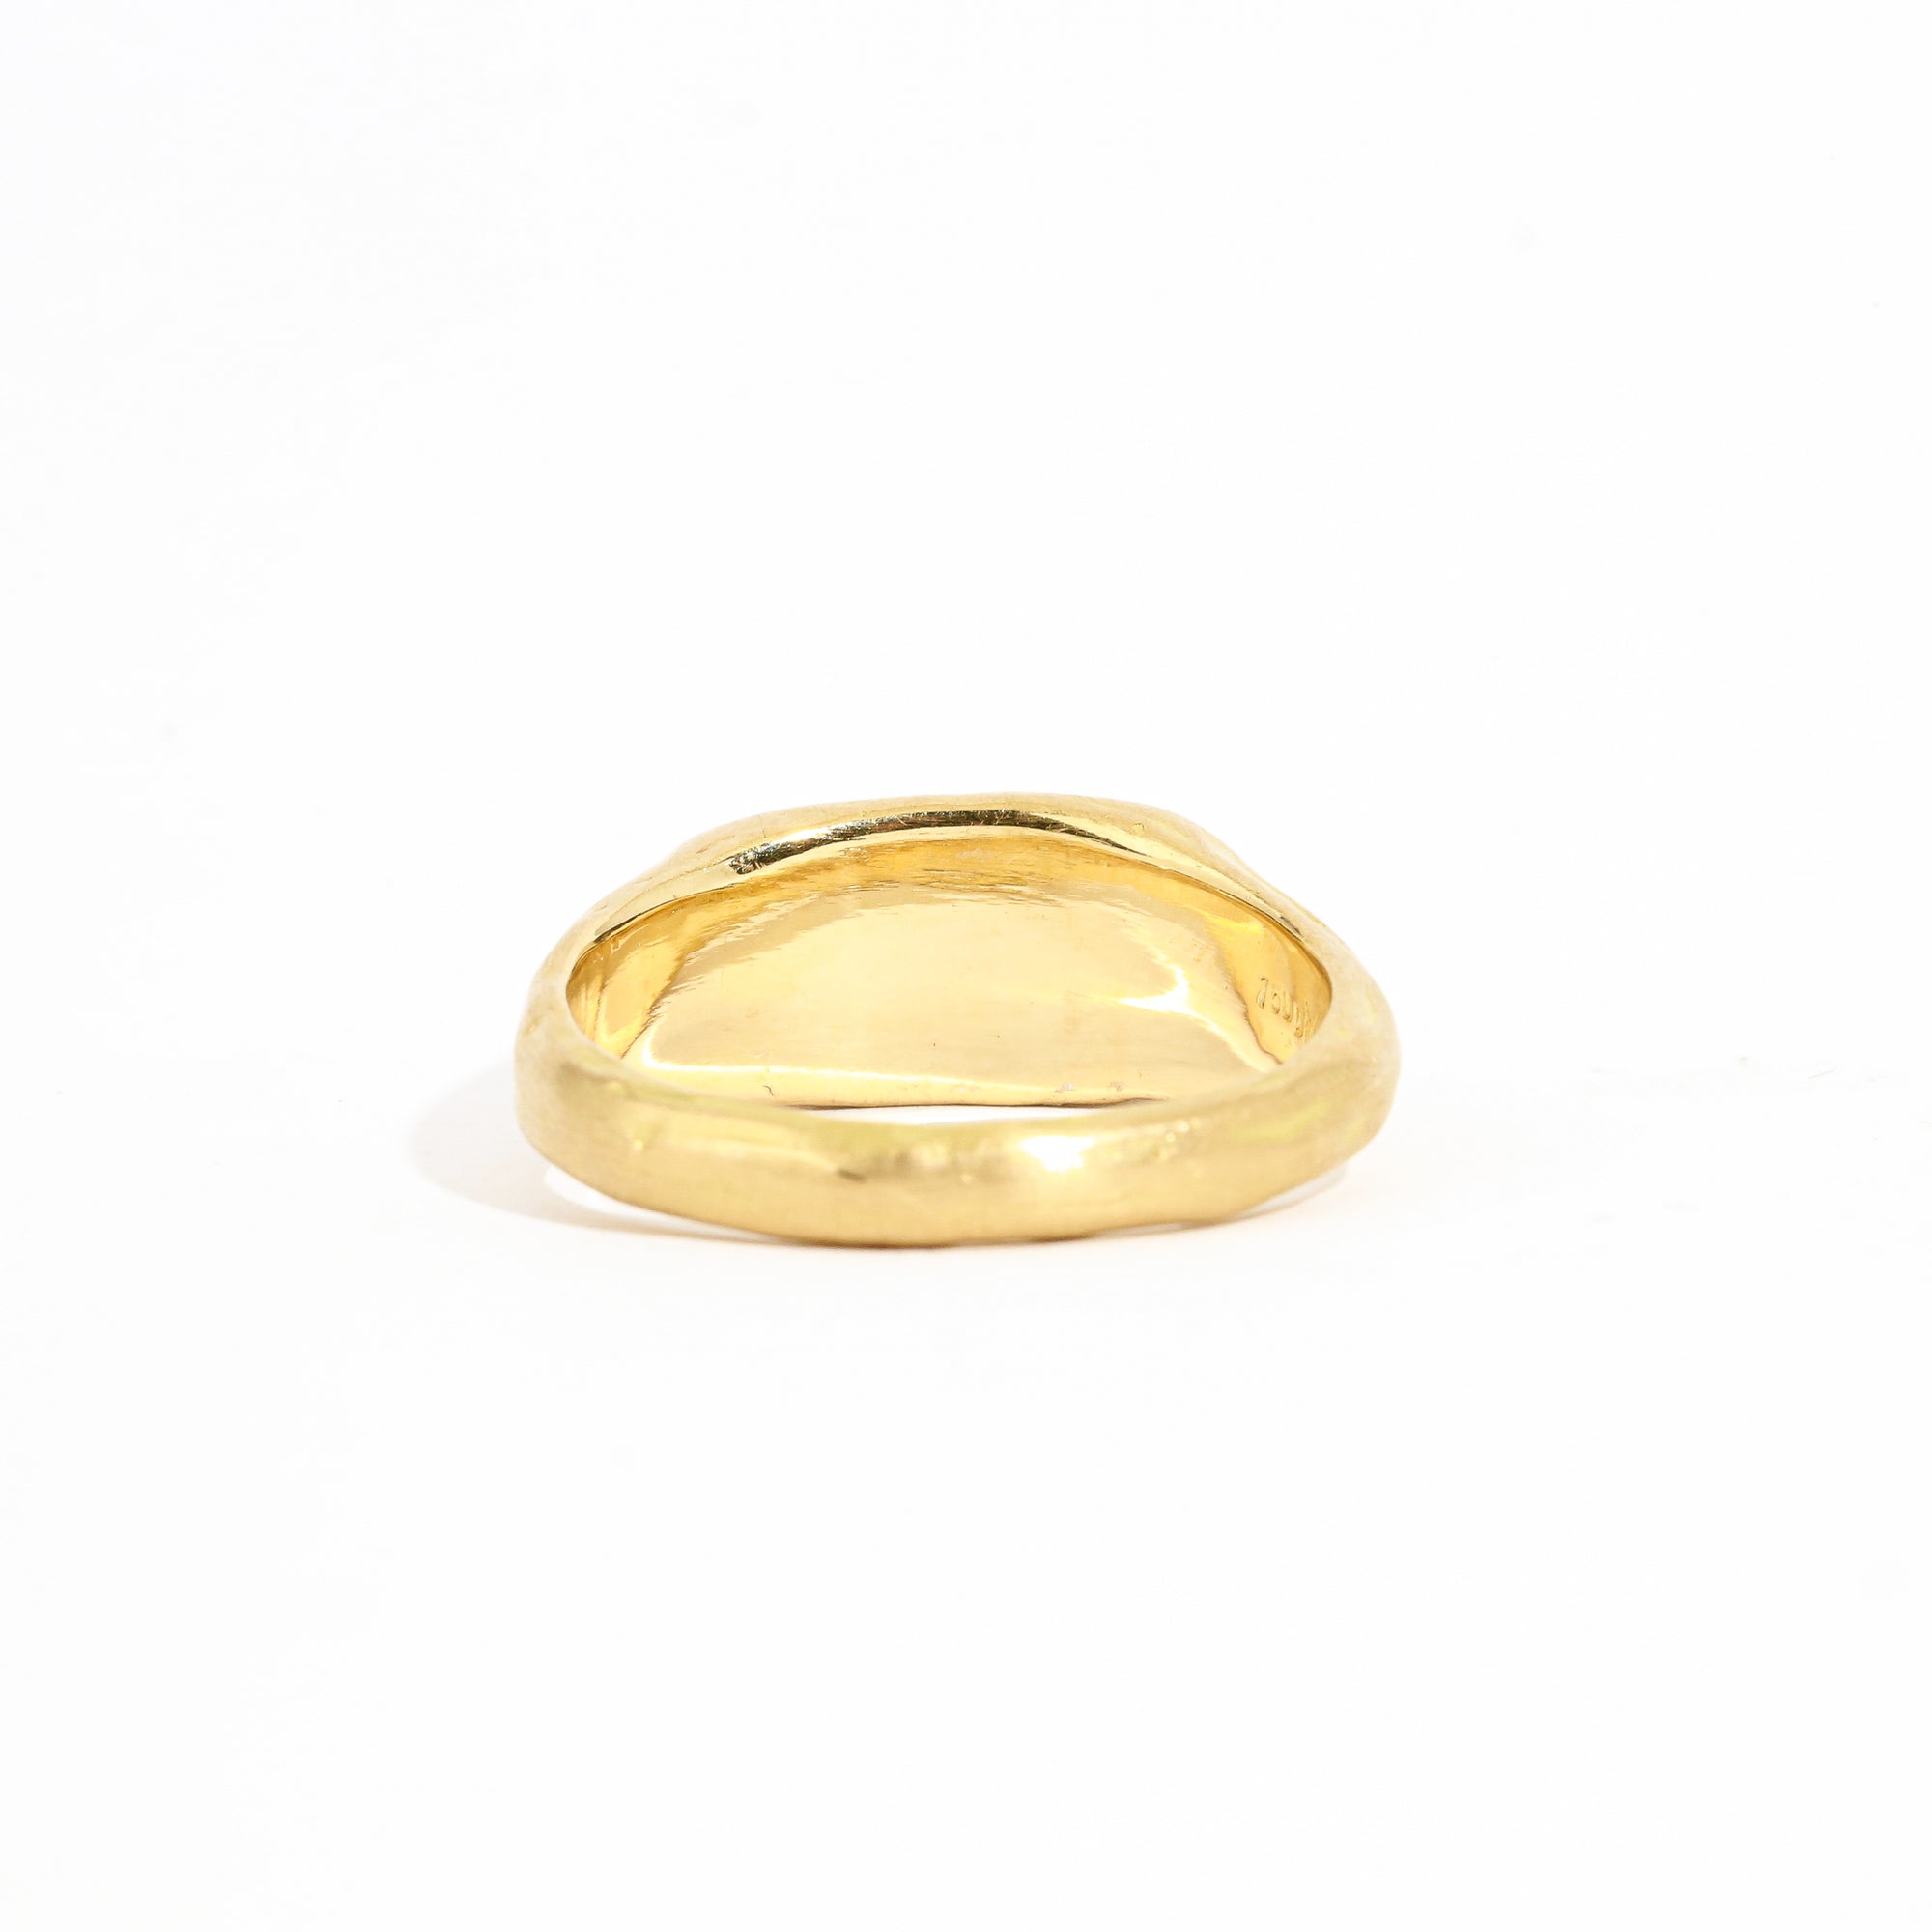 18 carat yellow gold signet, with a polished surface and soft matte band.